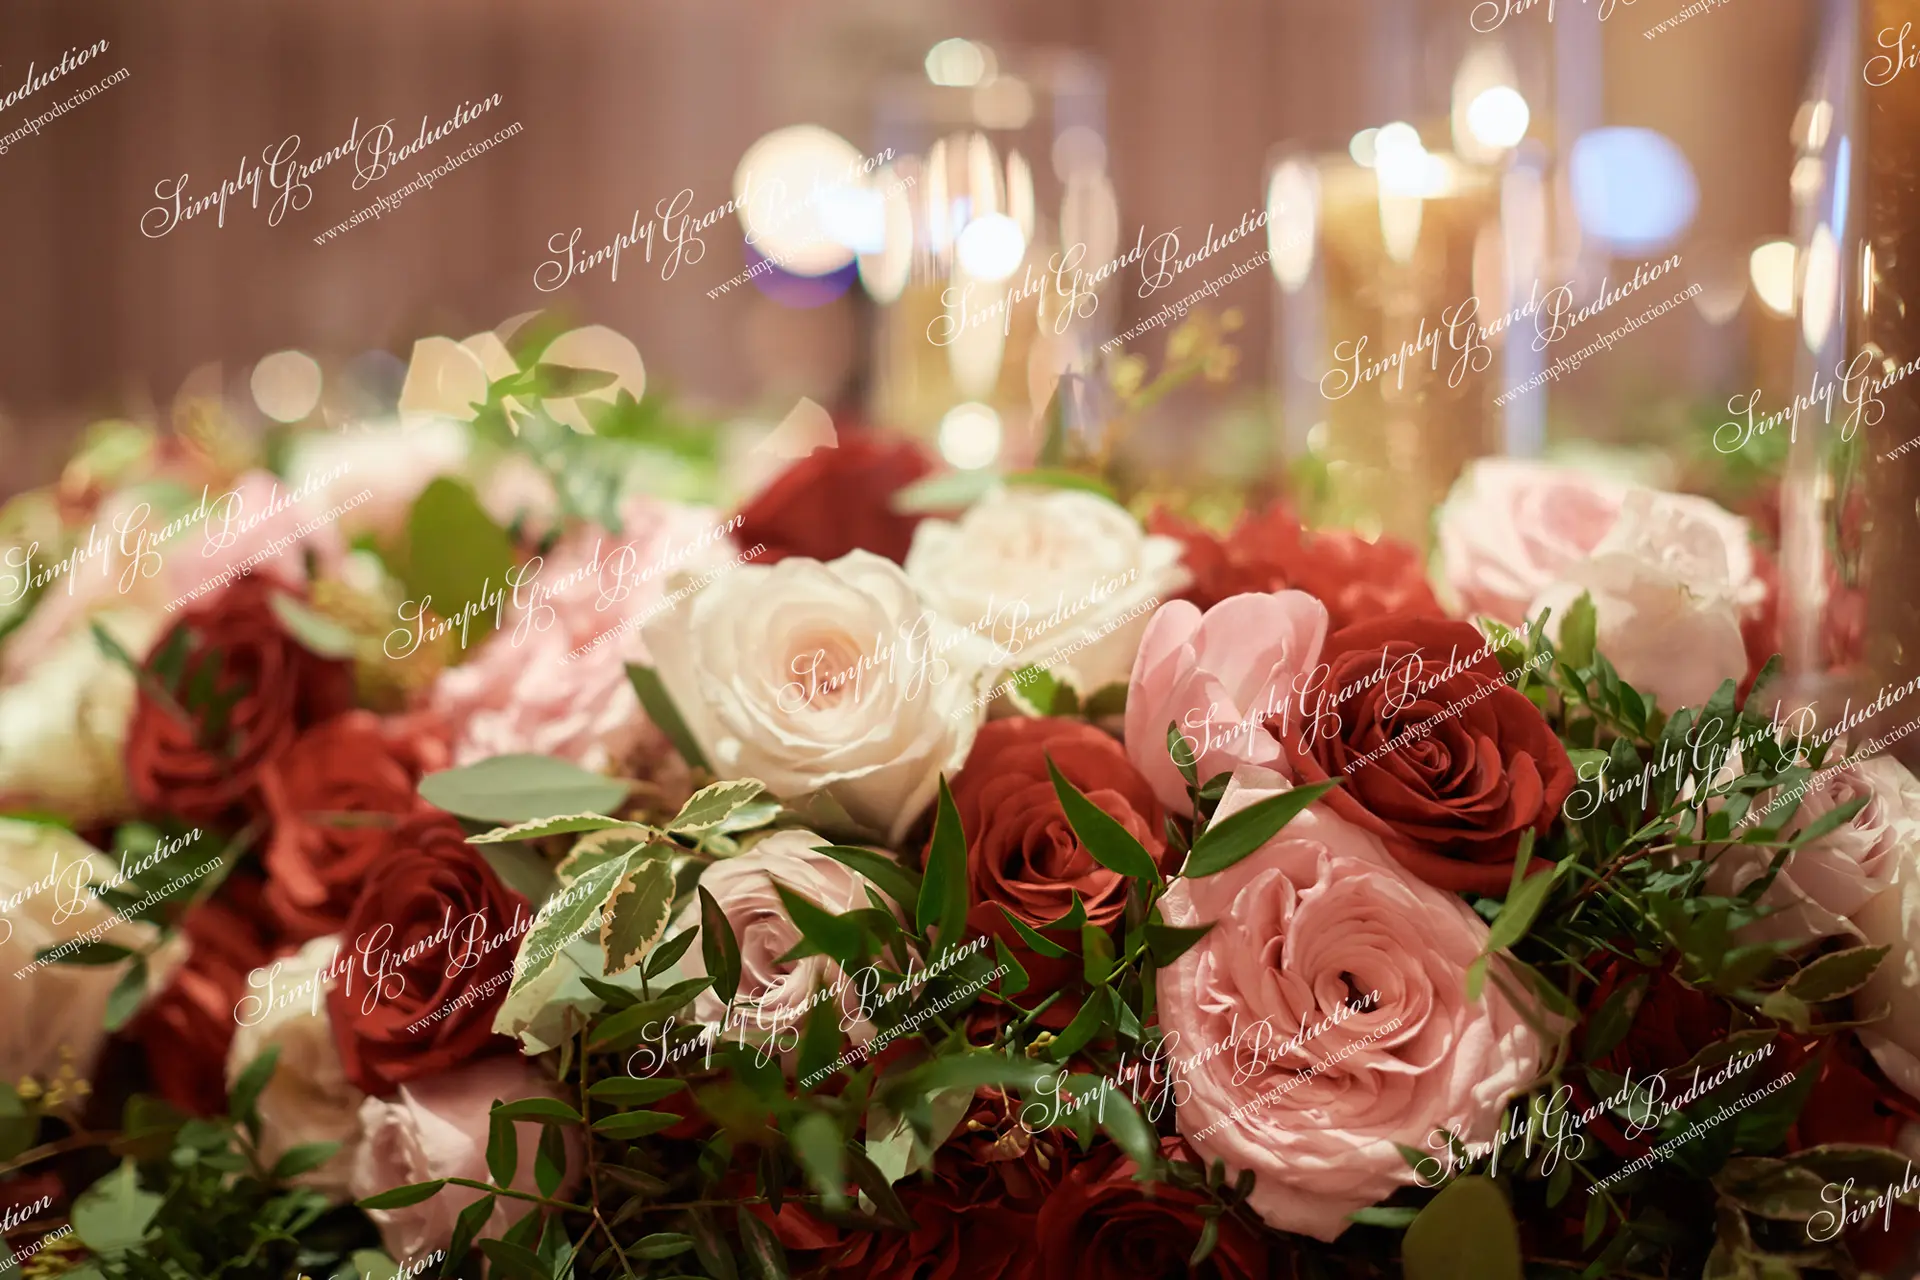 Simply_Grand_Production_Ballroom_centerpiece_pink_white_red_flower_Kerry_Hotel_1_6_wm